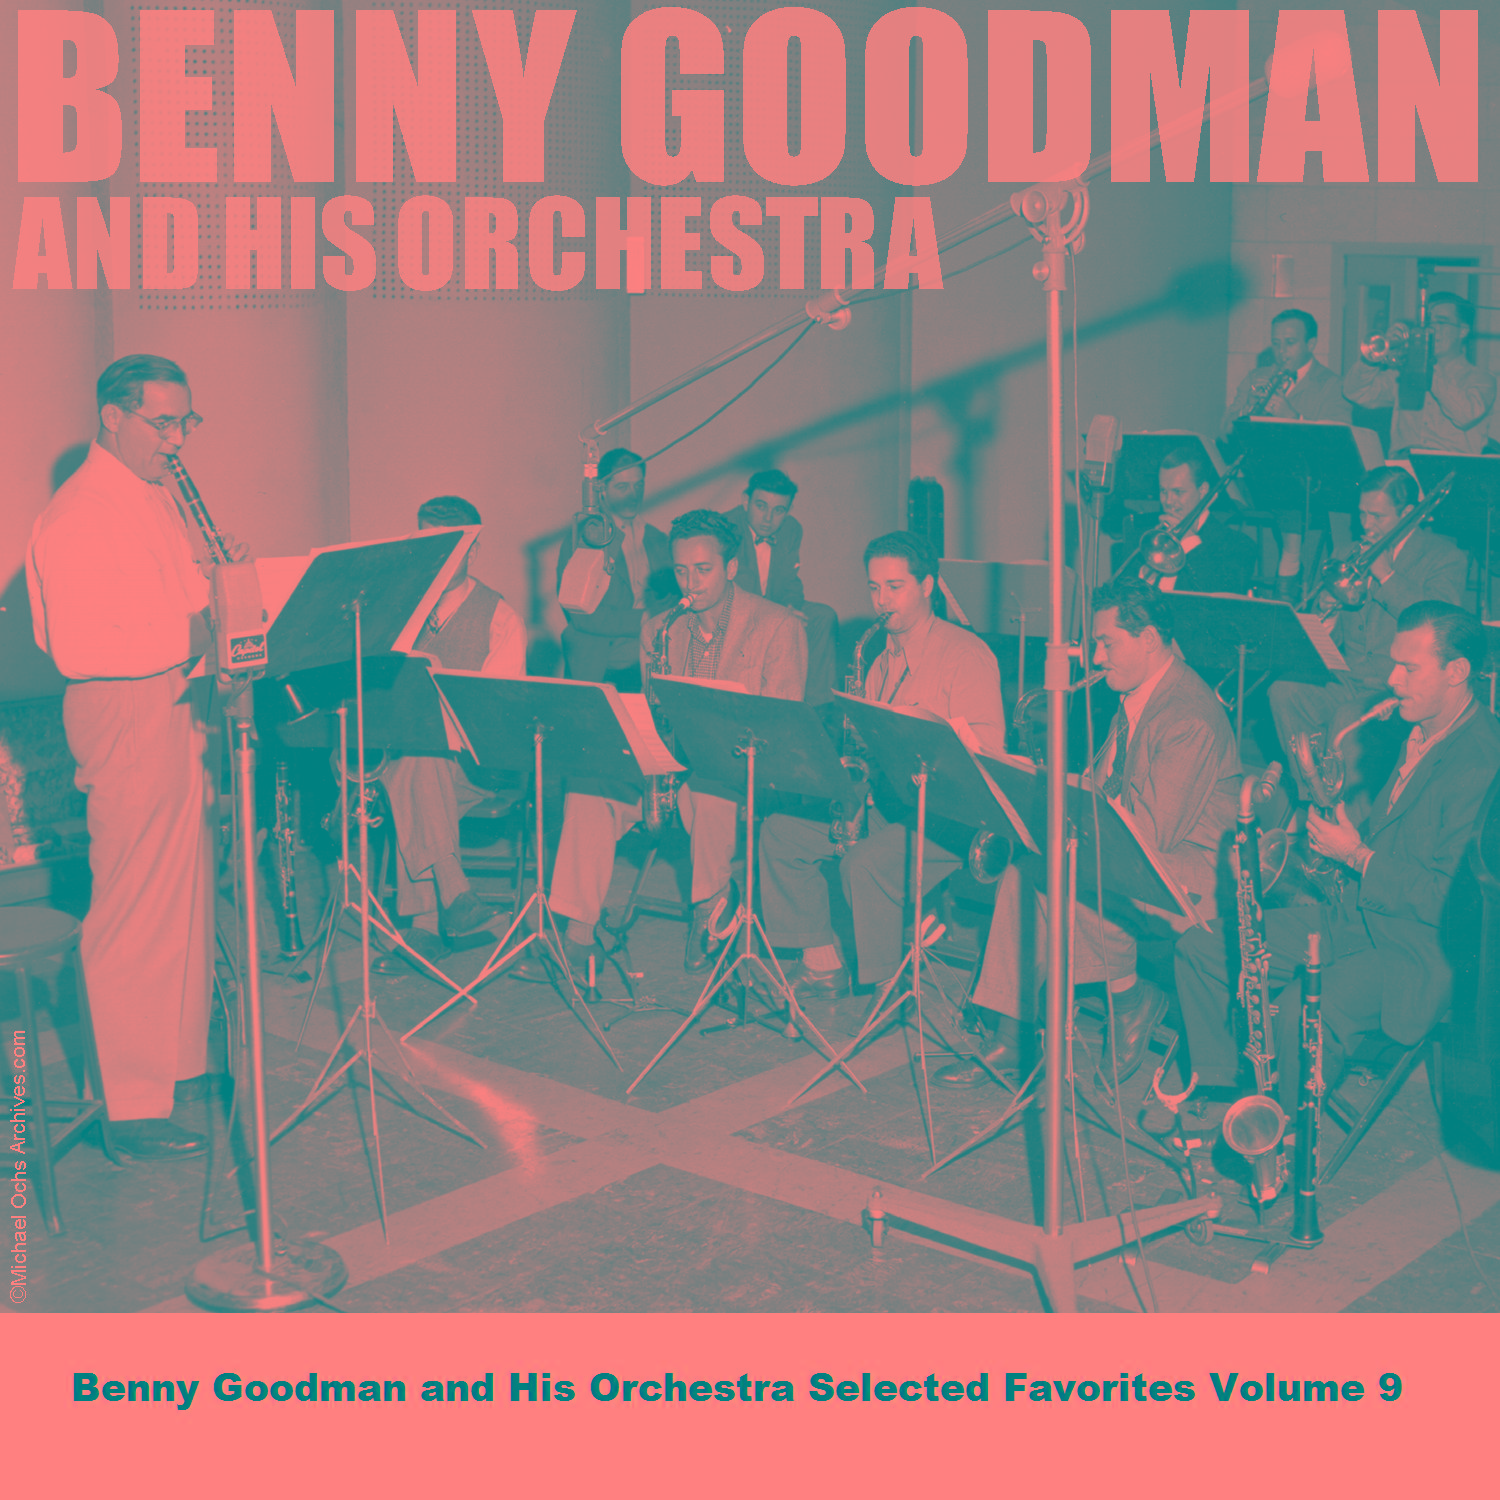 Benny Goodman and His Orchestra Selected Favorites Volume 9